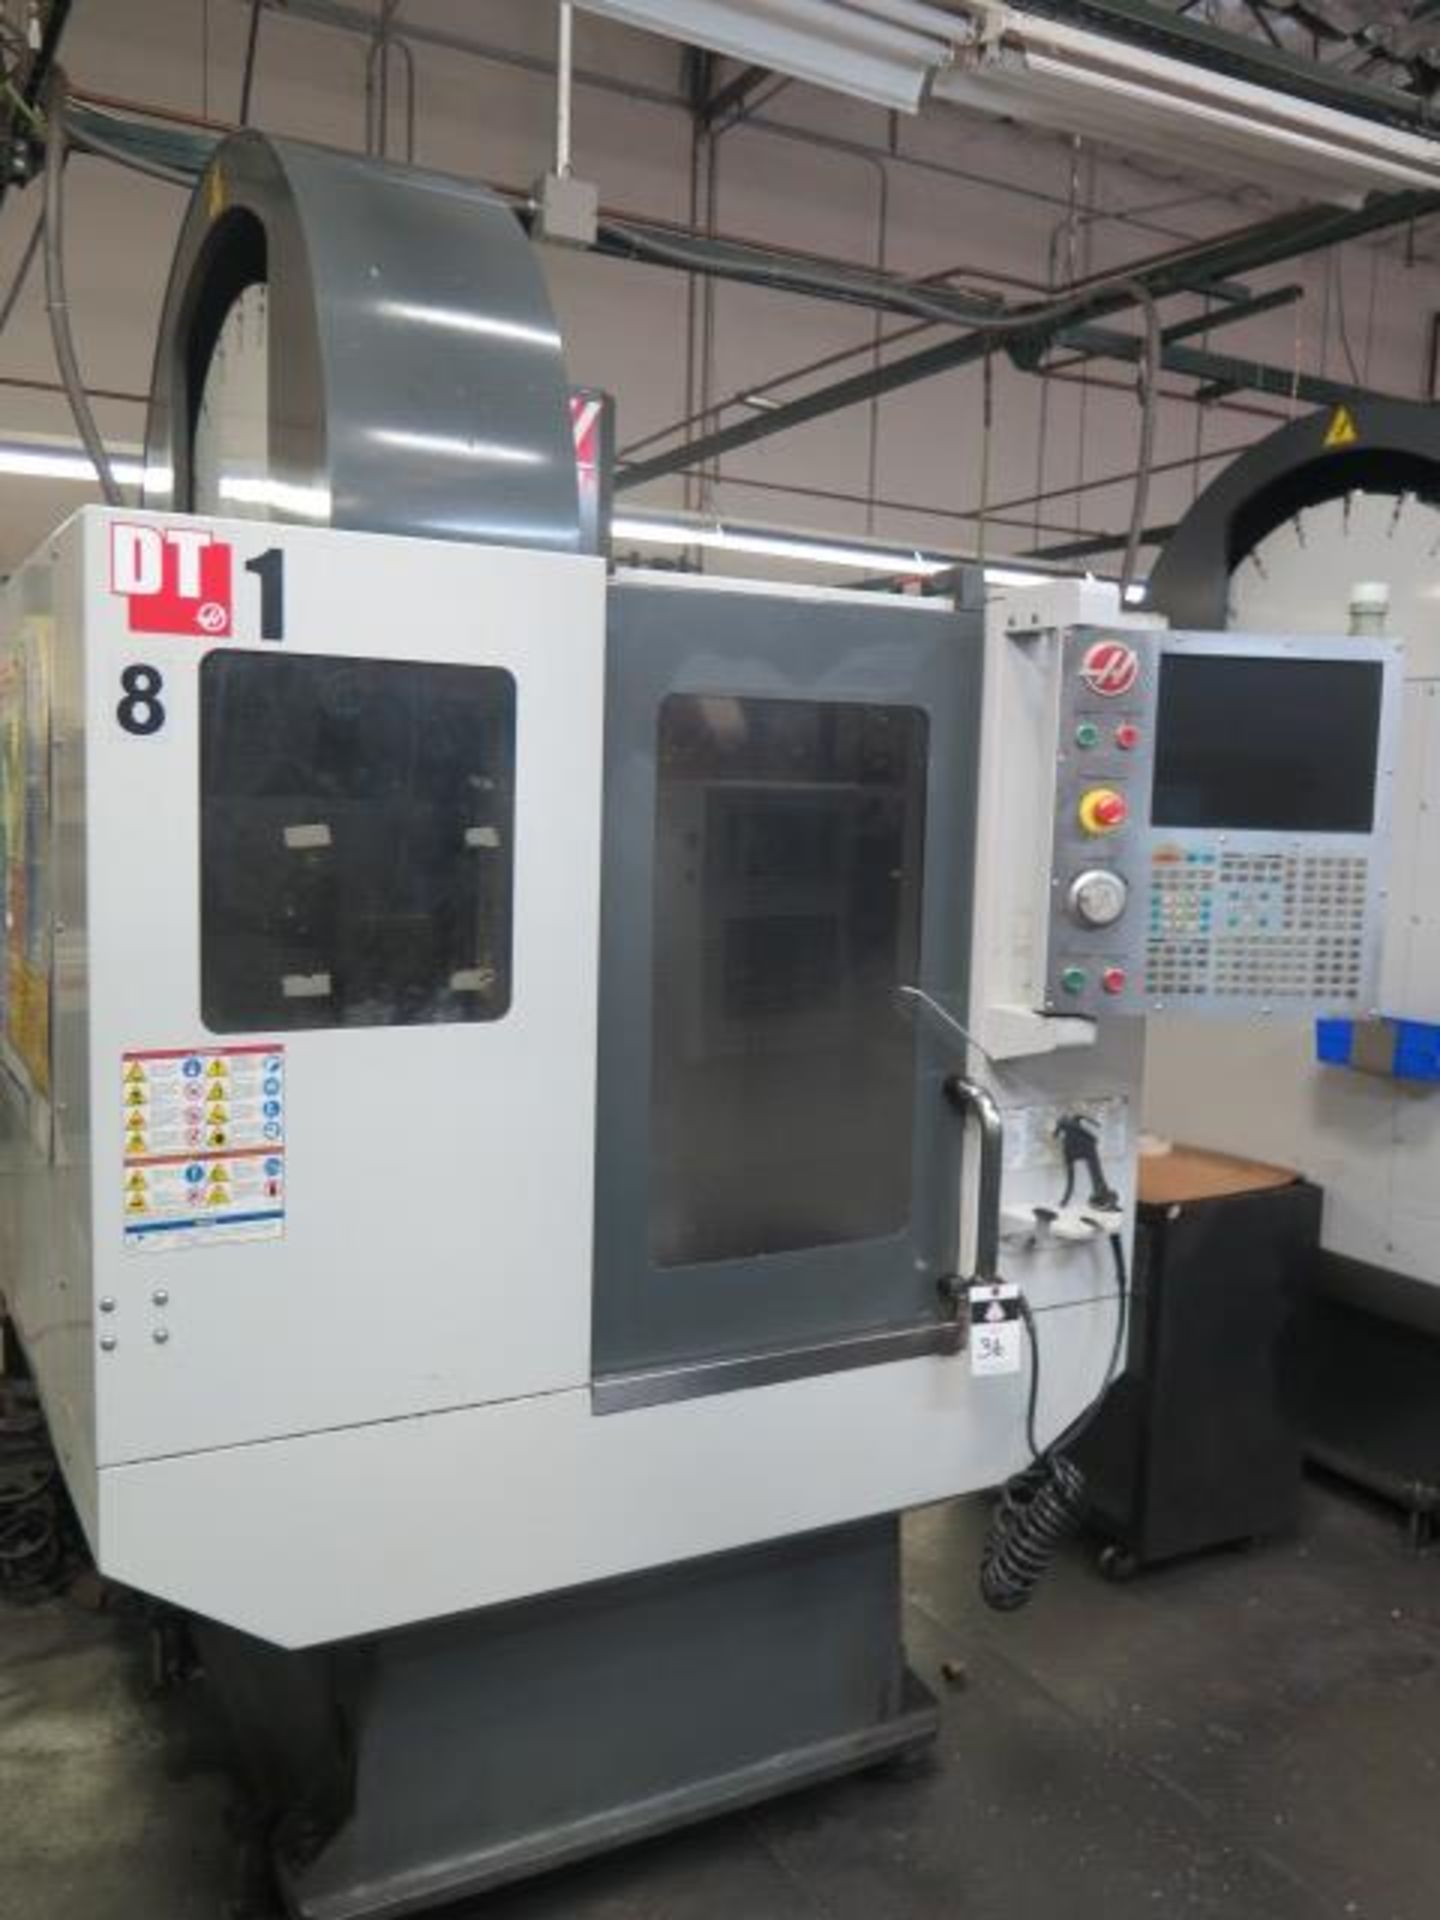 2012 Haas DT-1 4-Axis CNC VMC s/n 1093694 w/ Haas Controls, 20-Station ATC, SOLD AS IS - Image 2 of 13